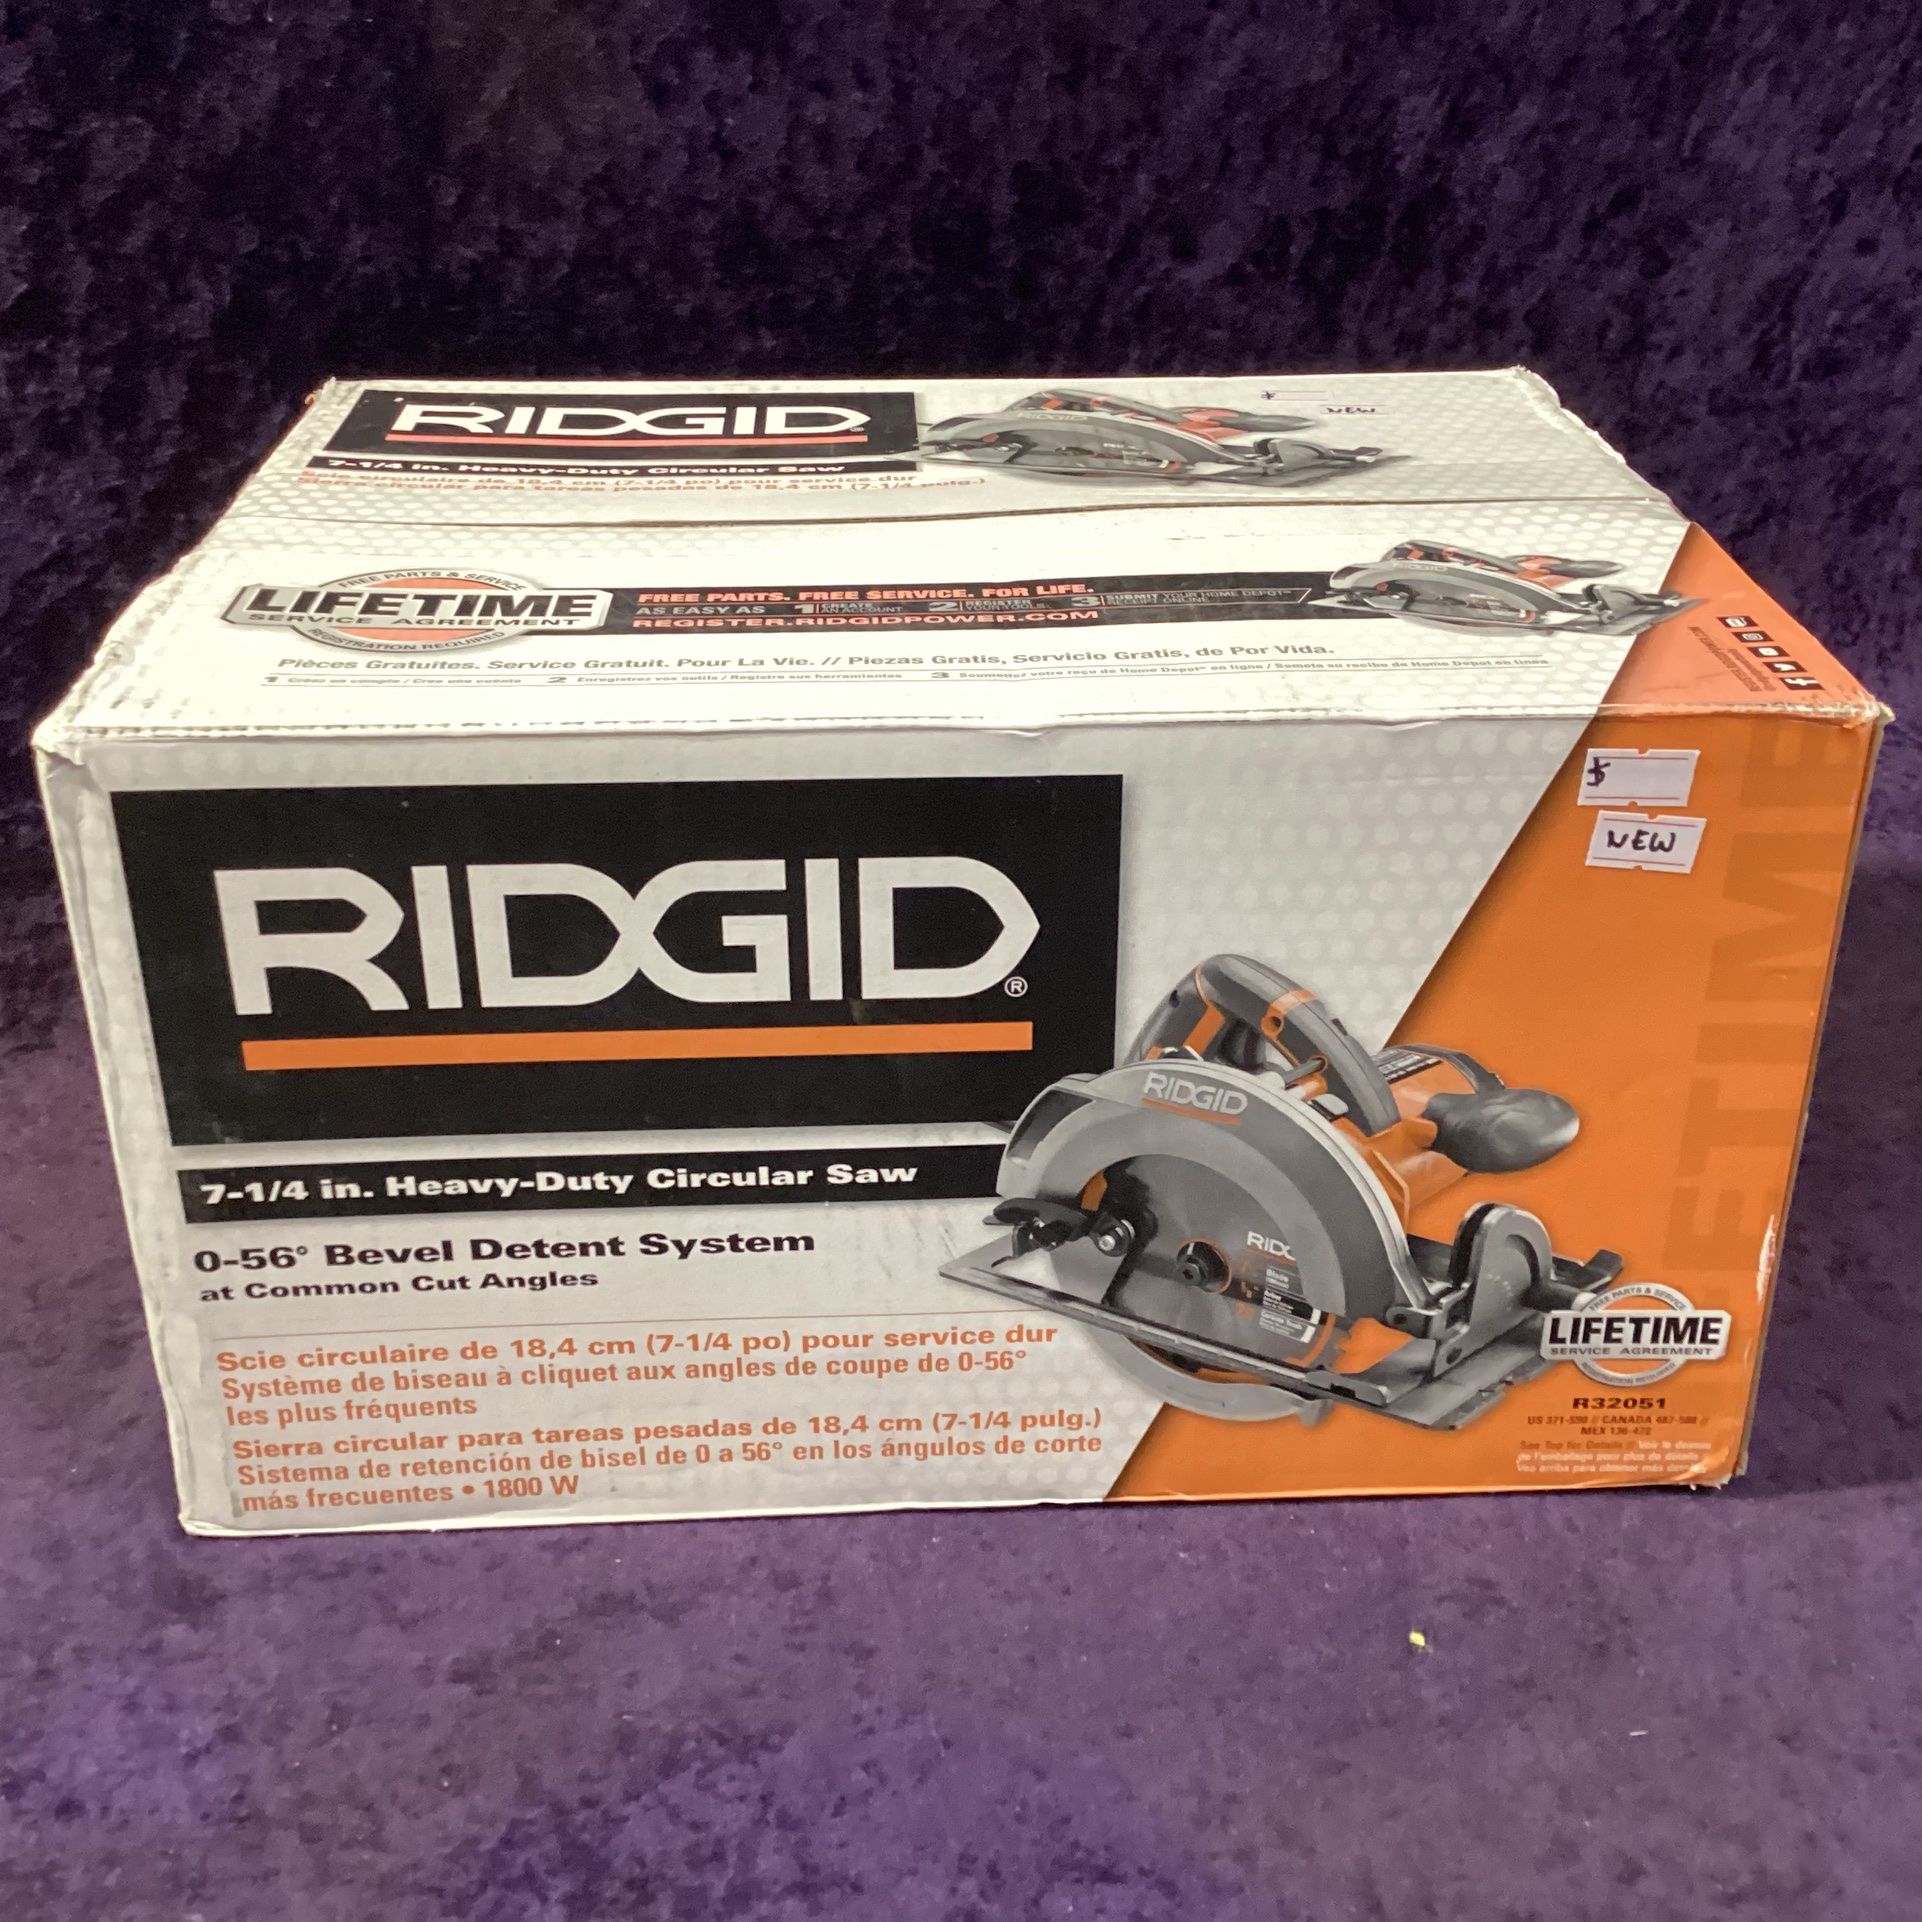 RIDGID 15 Amp 7-1/4” Circular Saw NEW IN BOX-$105! for Sale in Irving, TX  OfferUp